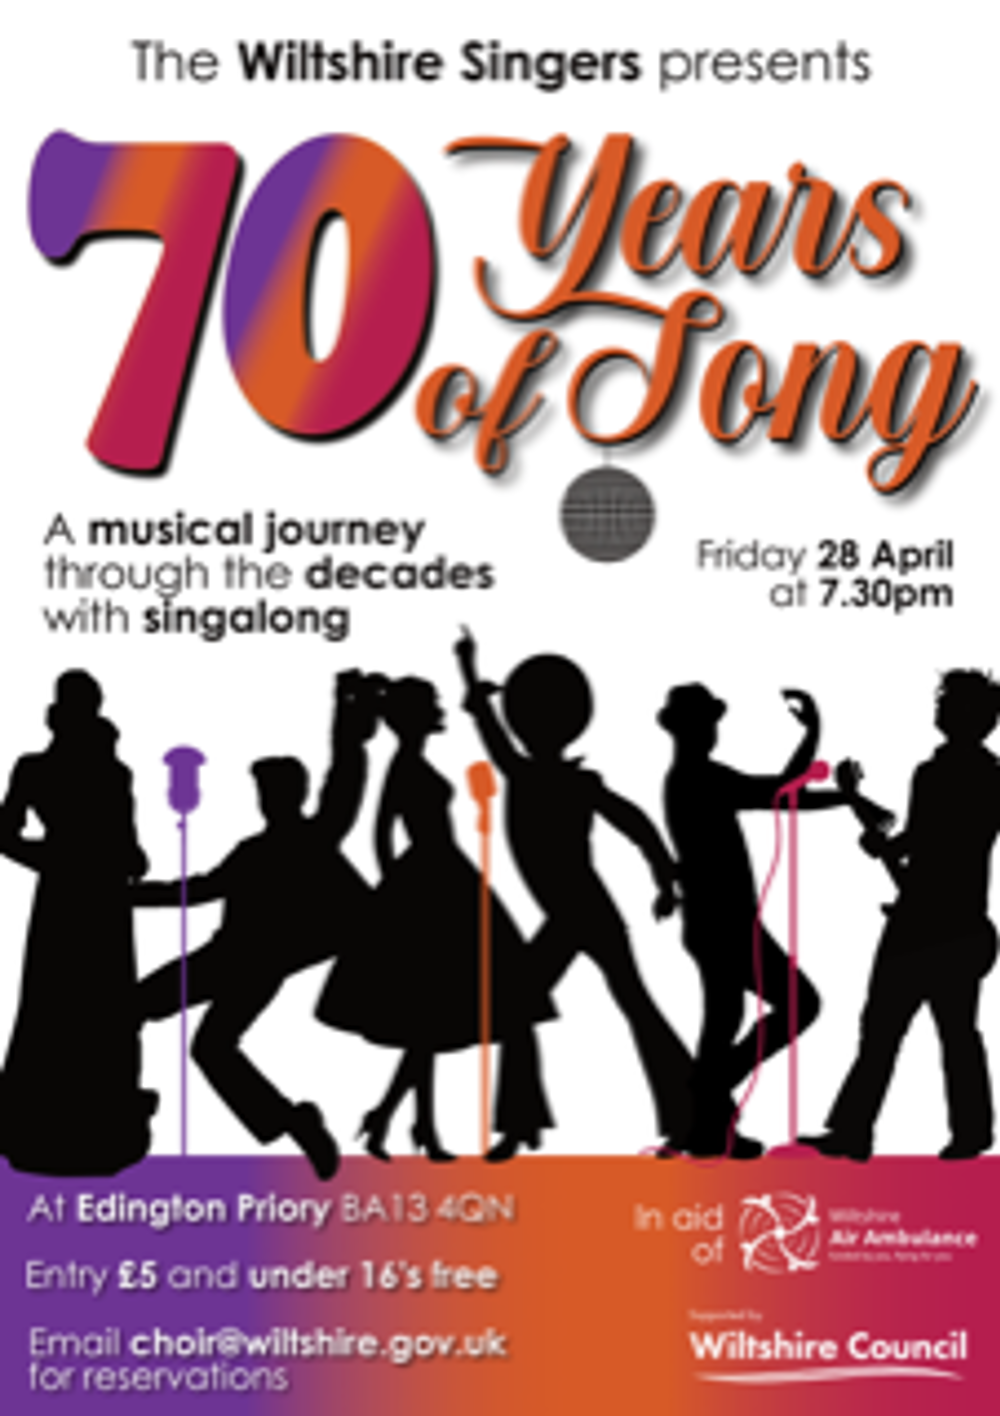 A poster advertising 70 Years of Song event. The poster shows silhouettes of singers with microphones.